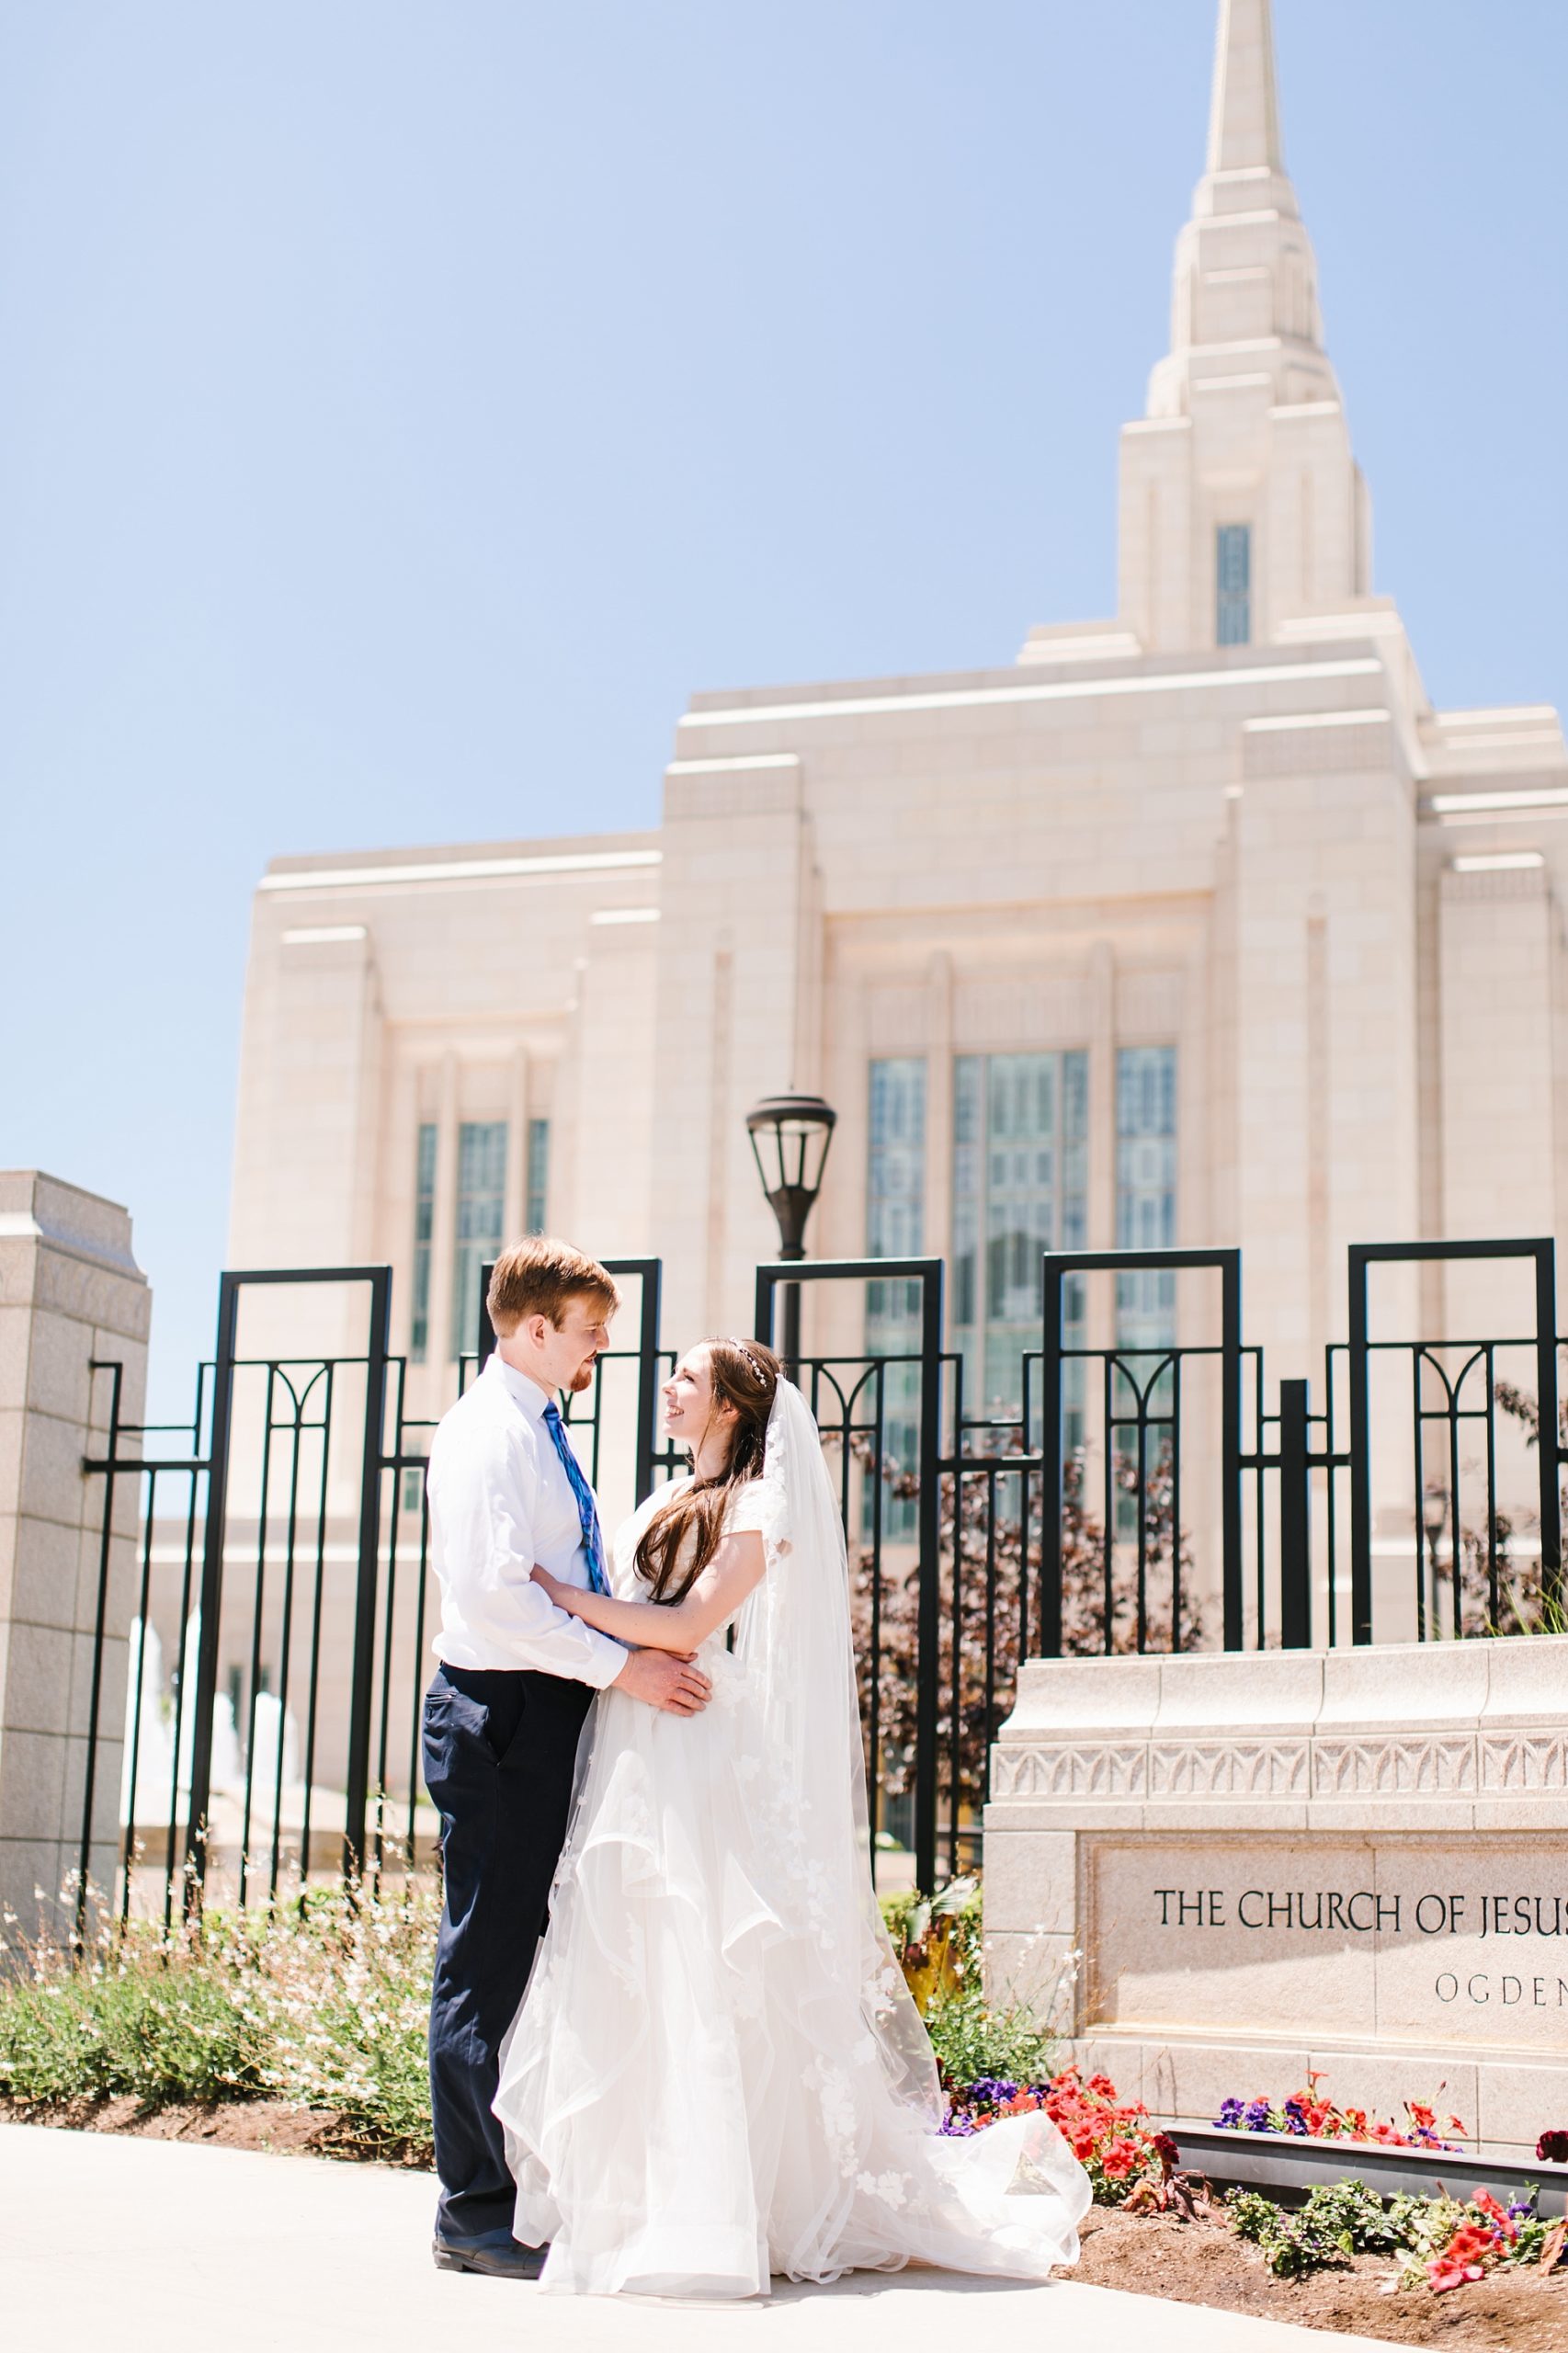 Wedding at the Ogden Utah temple during Covid pandemic